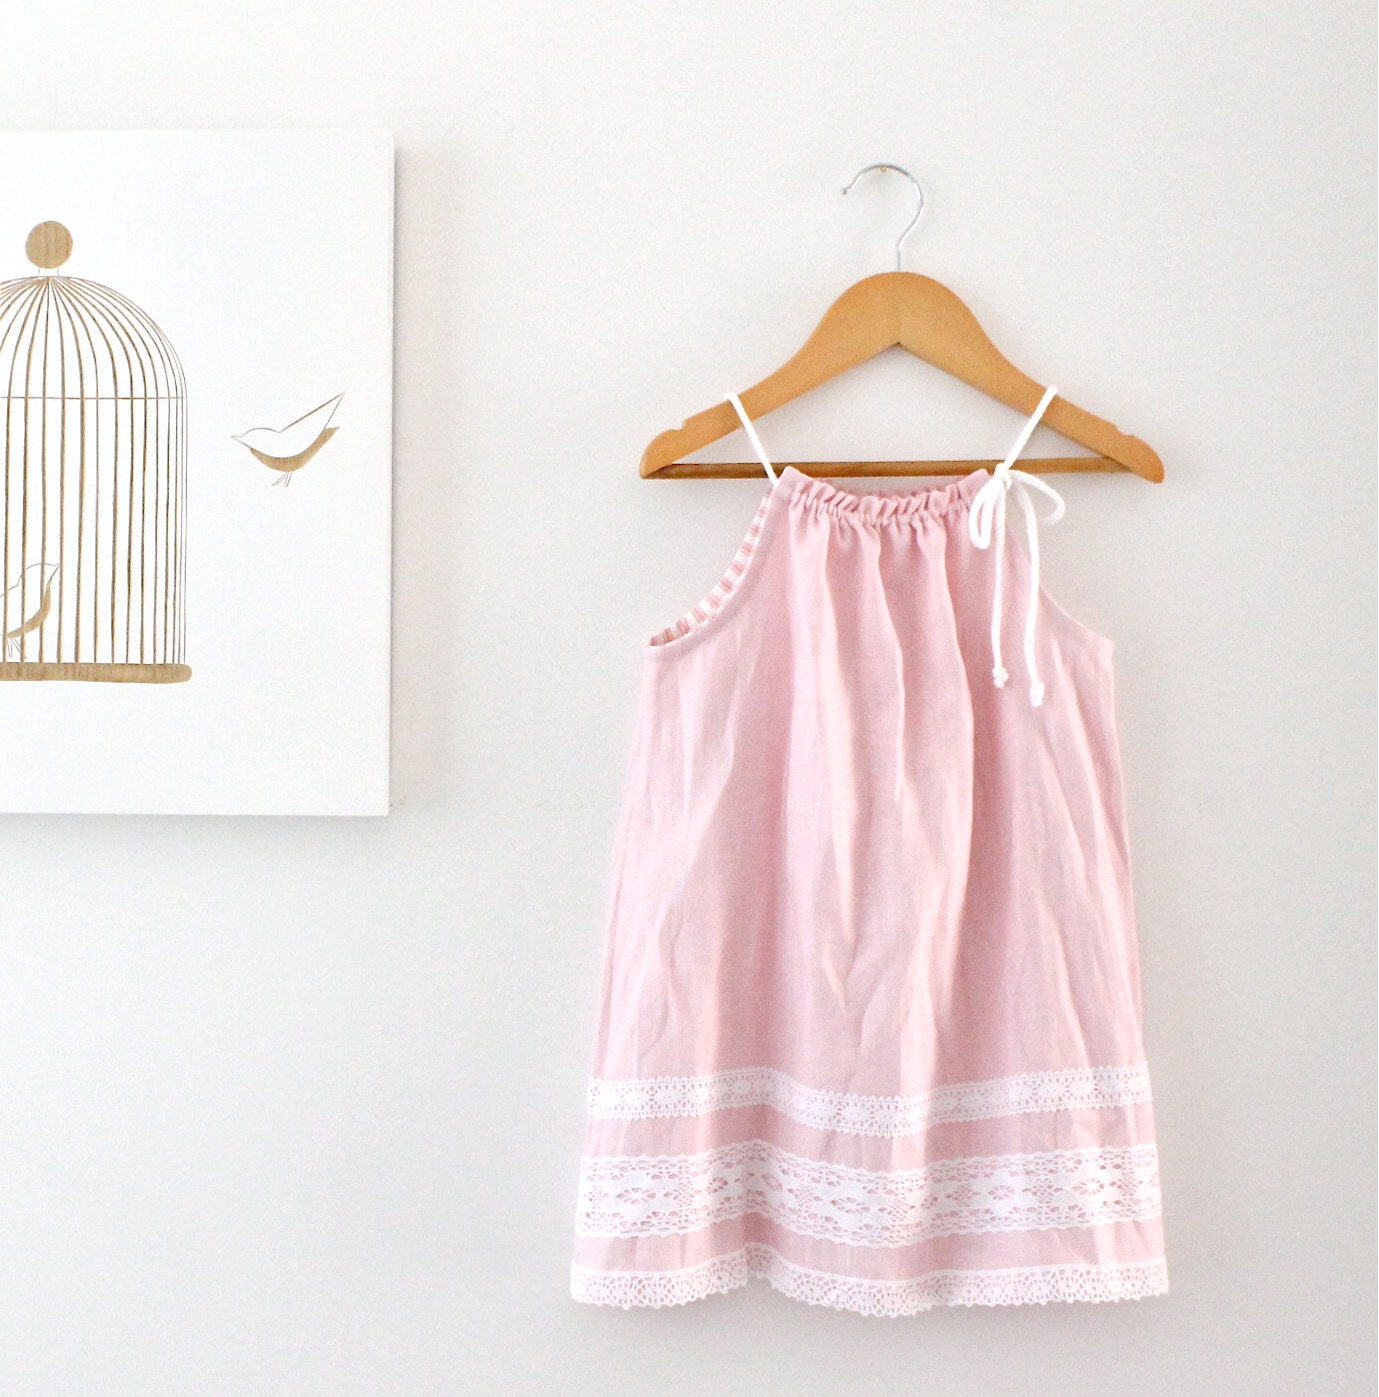 Toddler Girls Pink Linen Dress-Modern Girls Clothes-Natural Baby Clothes-Linen Kids ClothesHandmade Children Clothing by Chasing Mini - ChasingMini